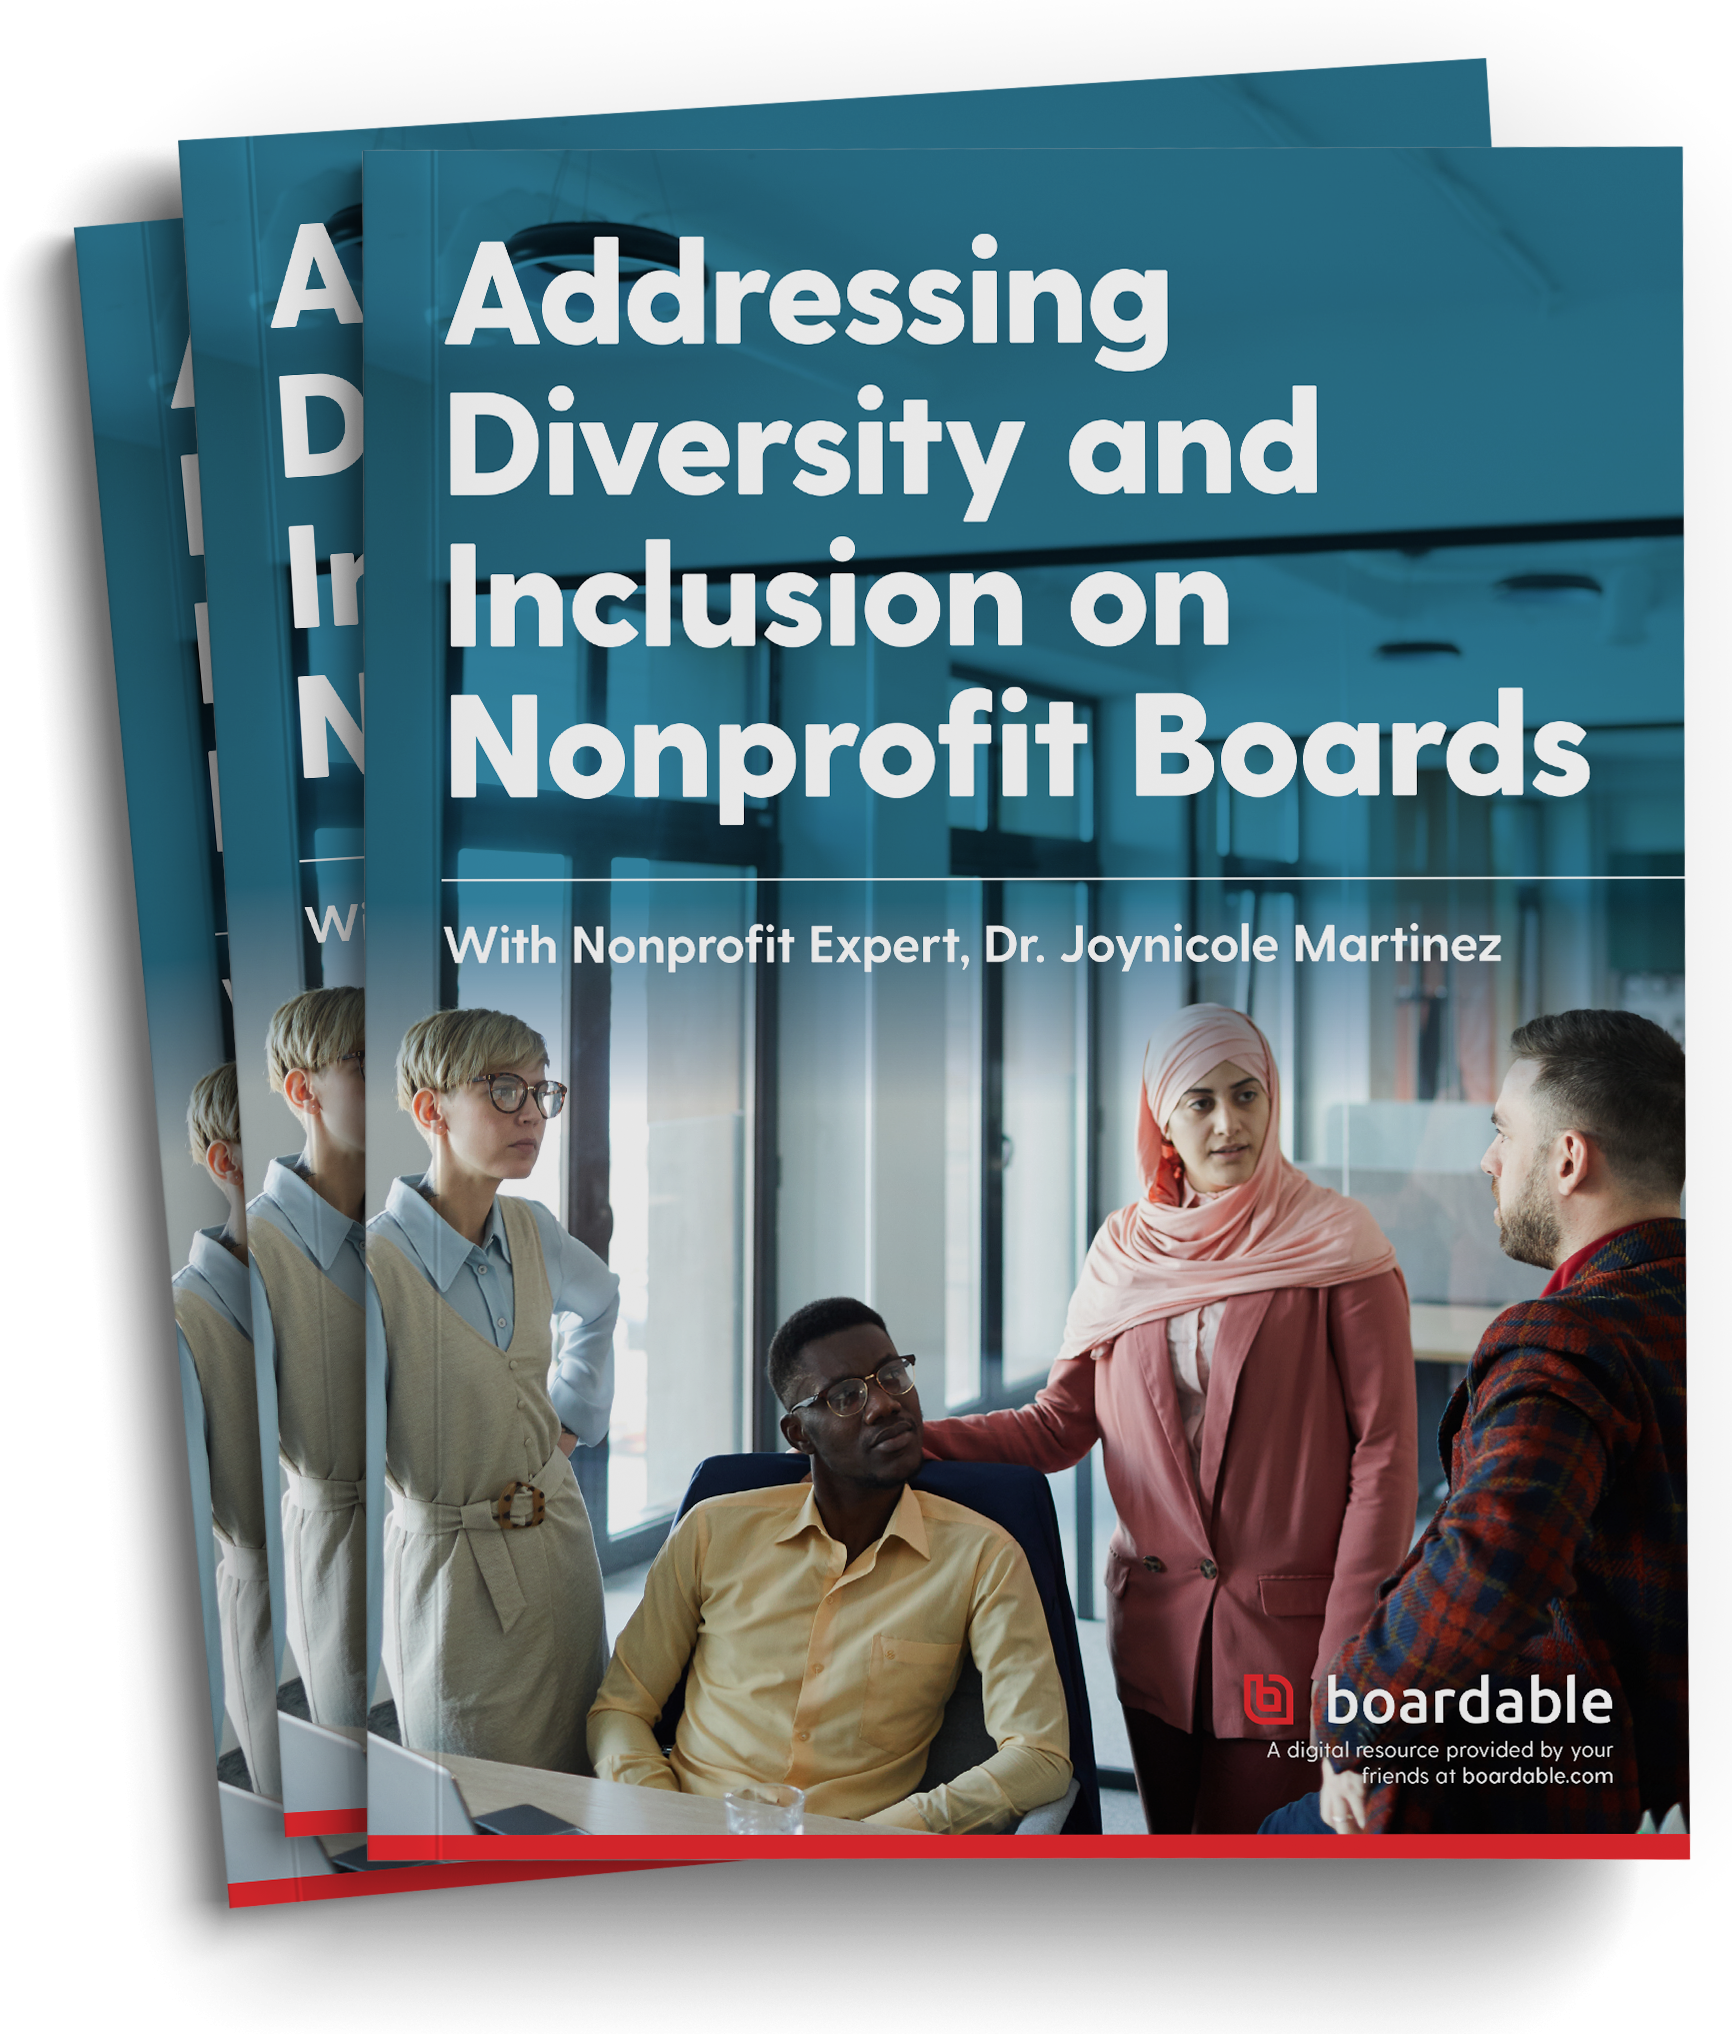 Boardable guide to diversity and inclusion on nonprofit boards.